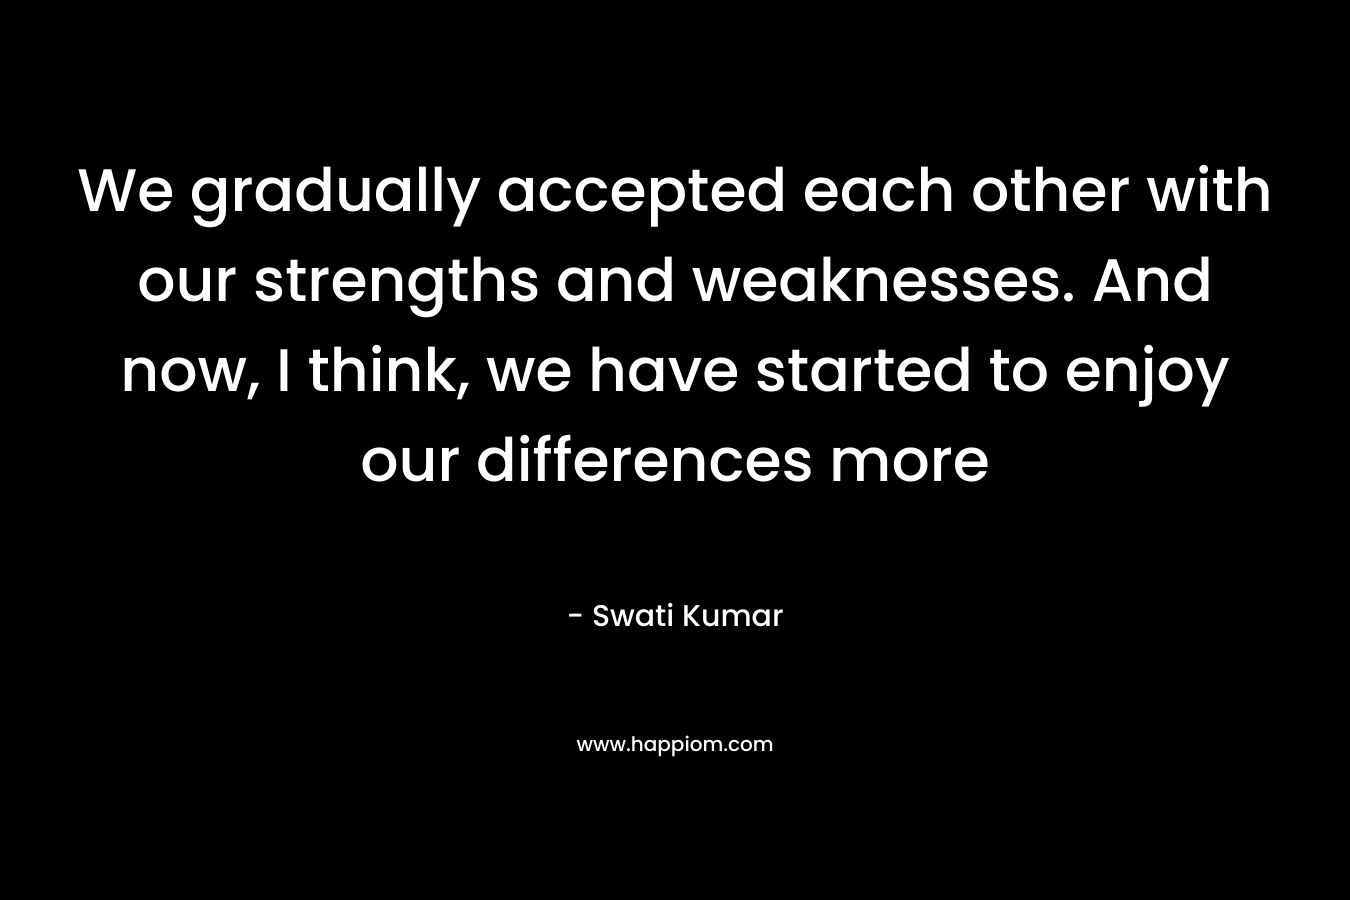 We gradually accepted each other with our strengths and weaknesses. And now, I think, we have started to enjoy our differences more – Swati Kumar